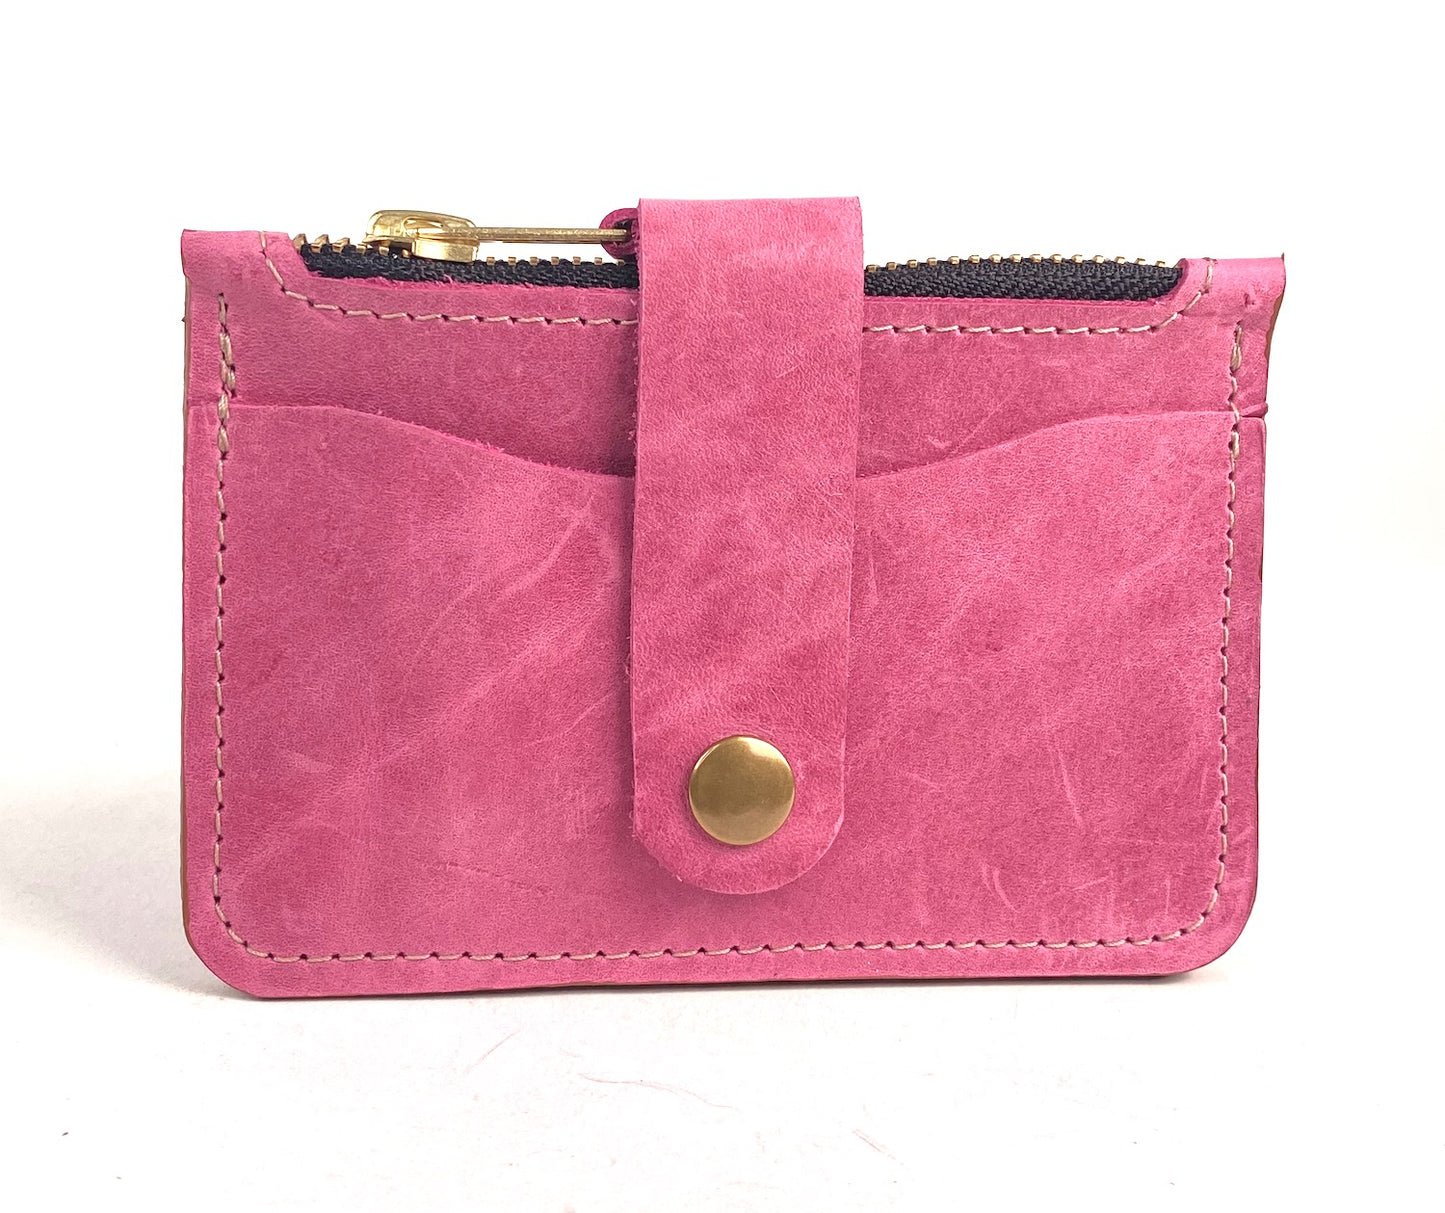 CardGuard Minimalist Leather Wallet in Pink